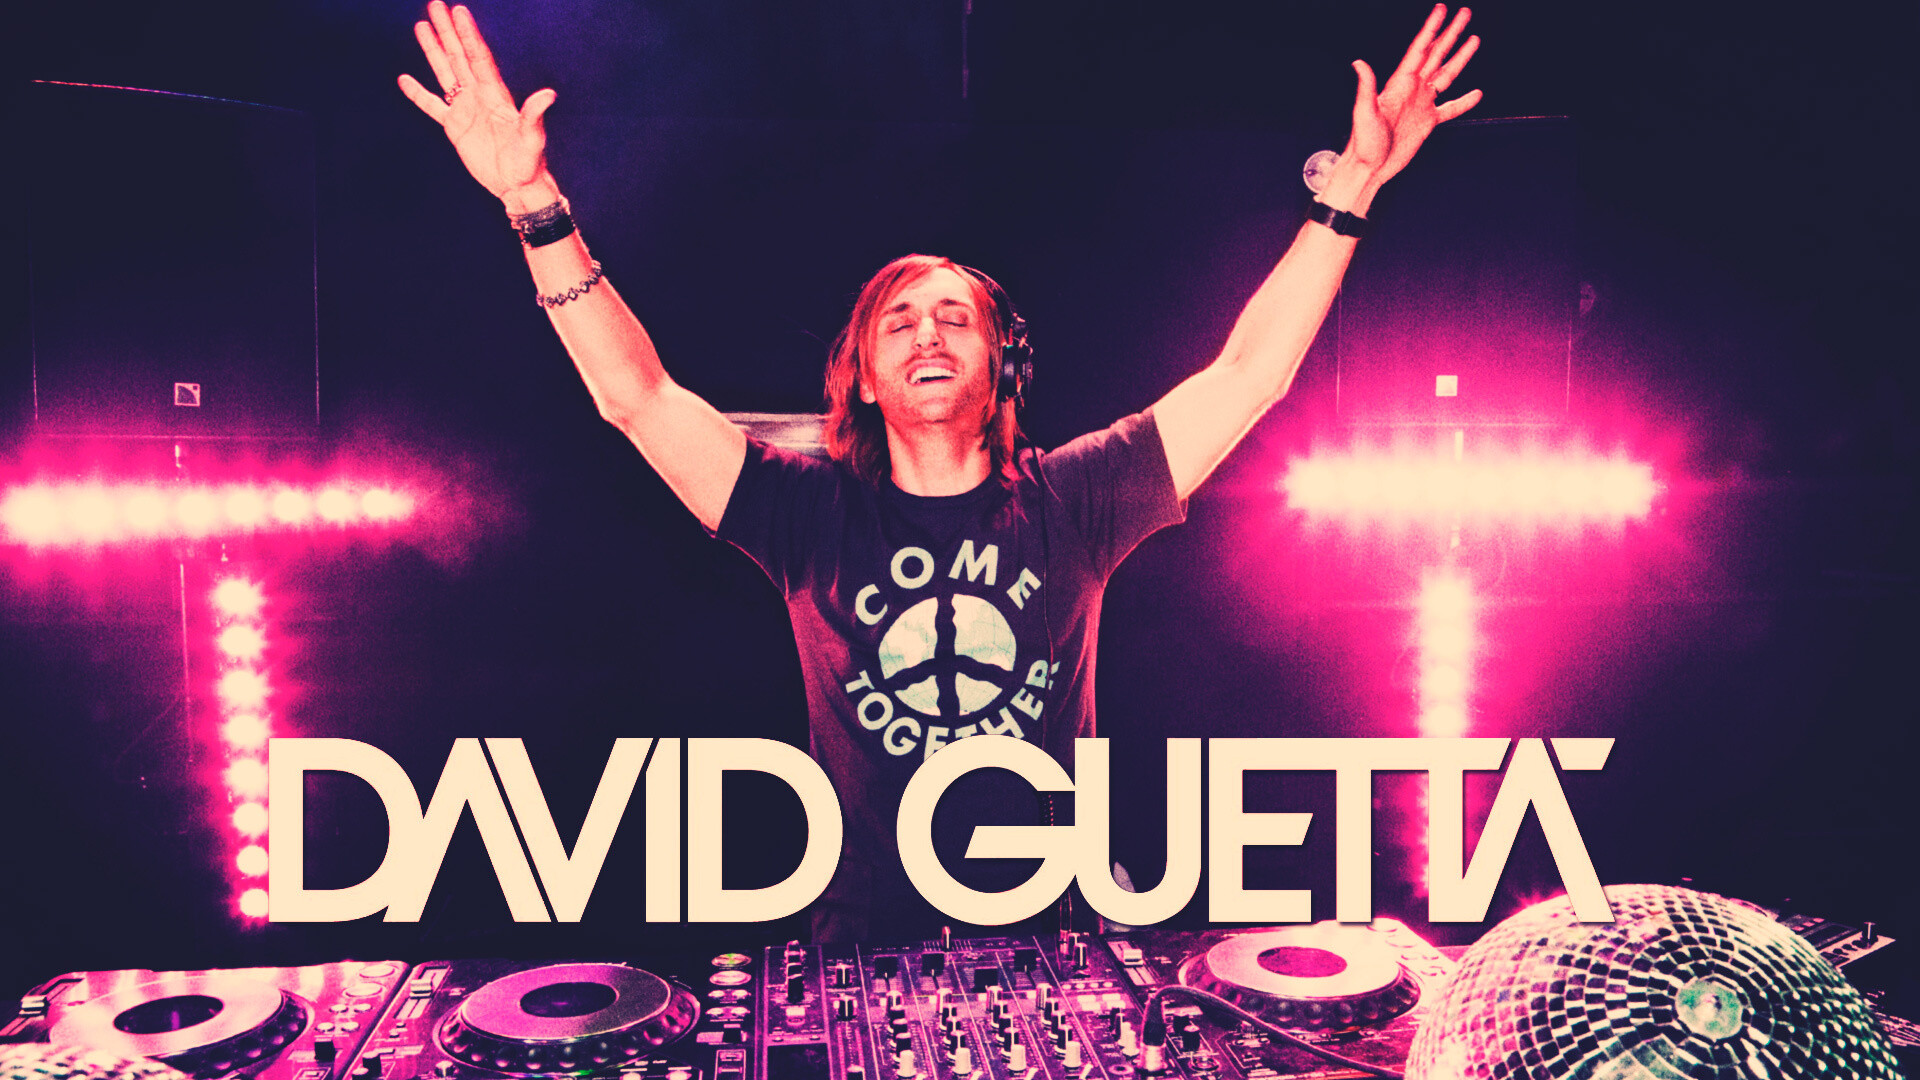 David Guetta: One of the first DJs who pioneered EDM in Europe, The third album Pop Life. 1920x1080 Full HD Wallpaper.